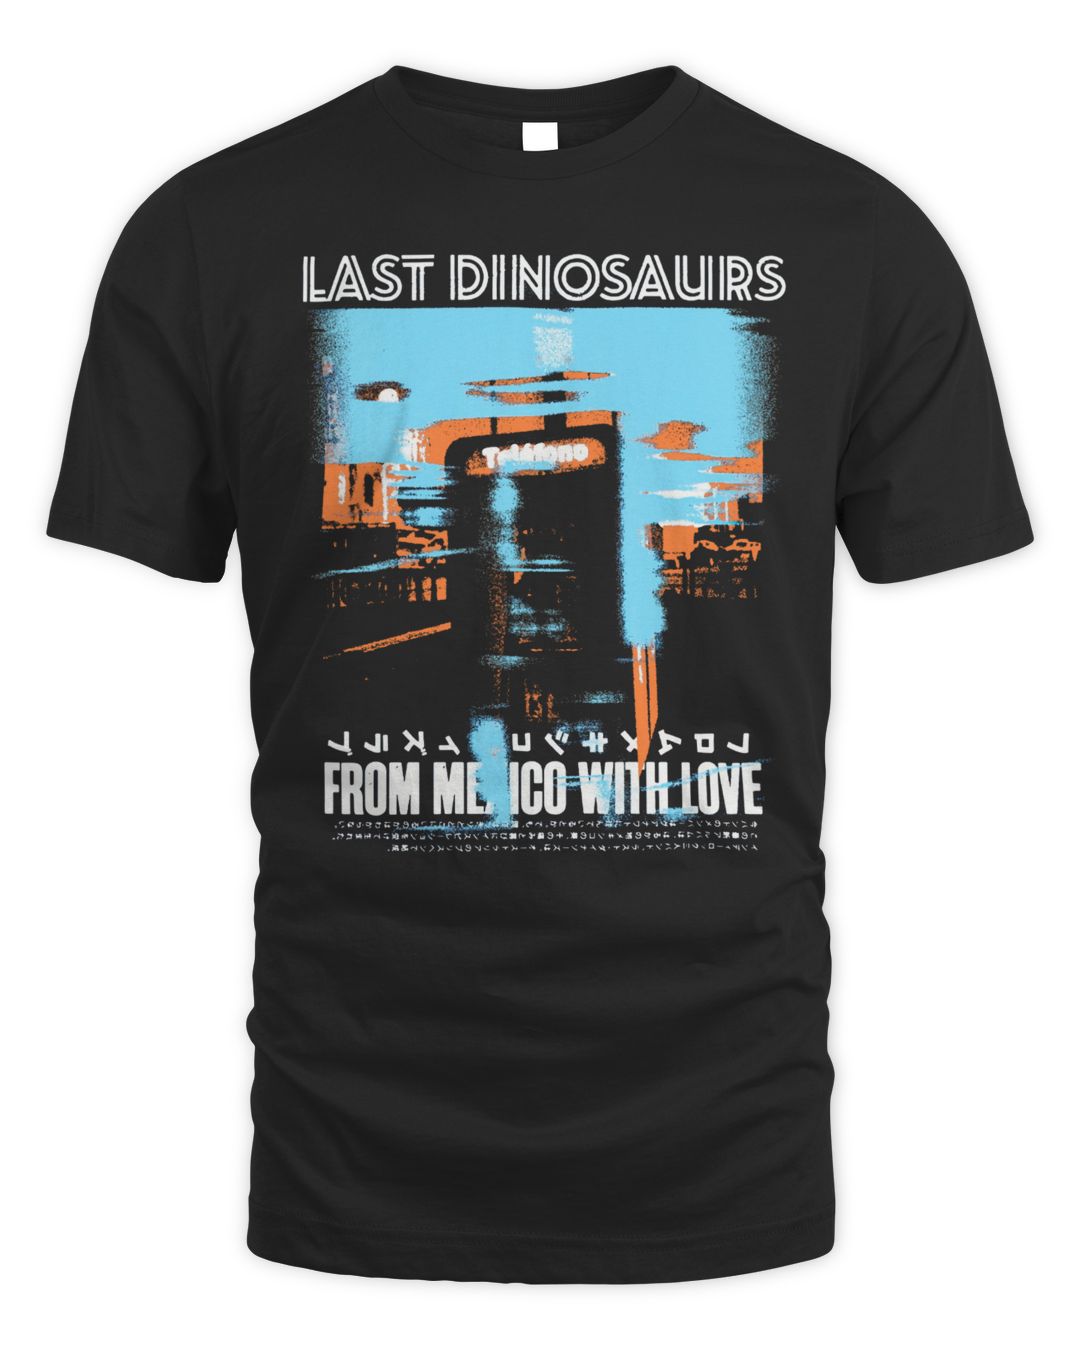 Last Dinosaurs Merch From Mexico With Love Shirt